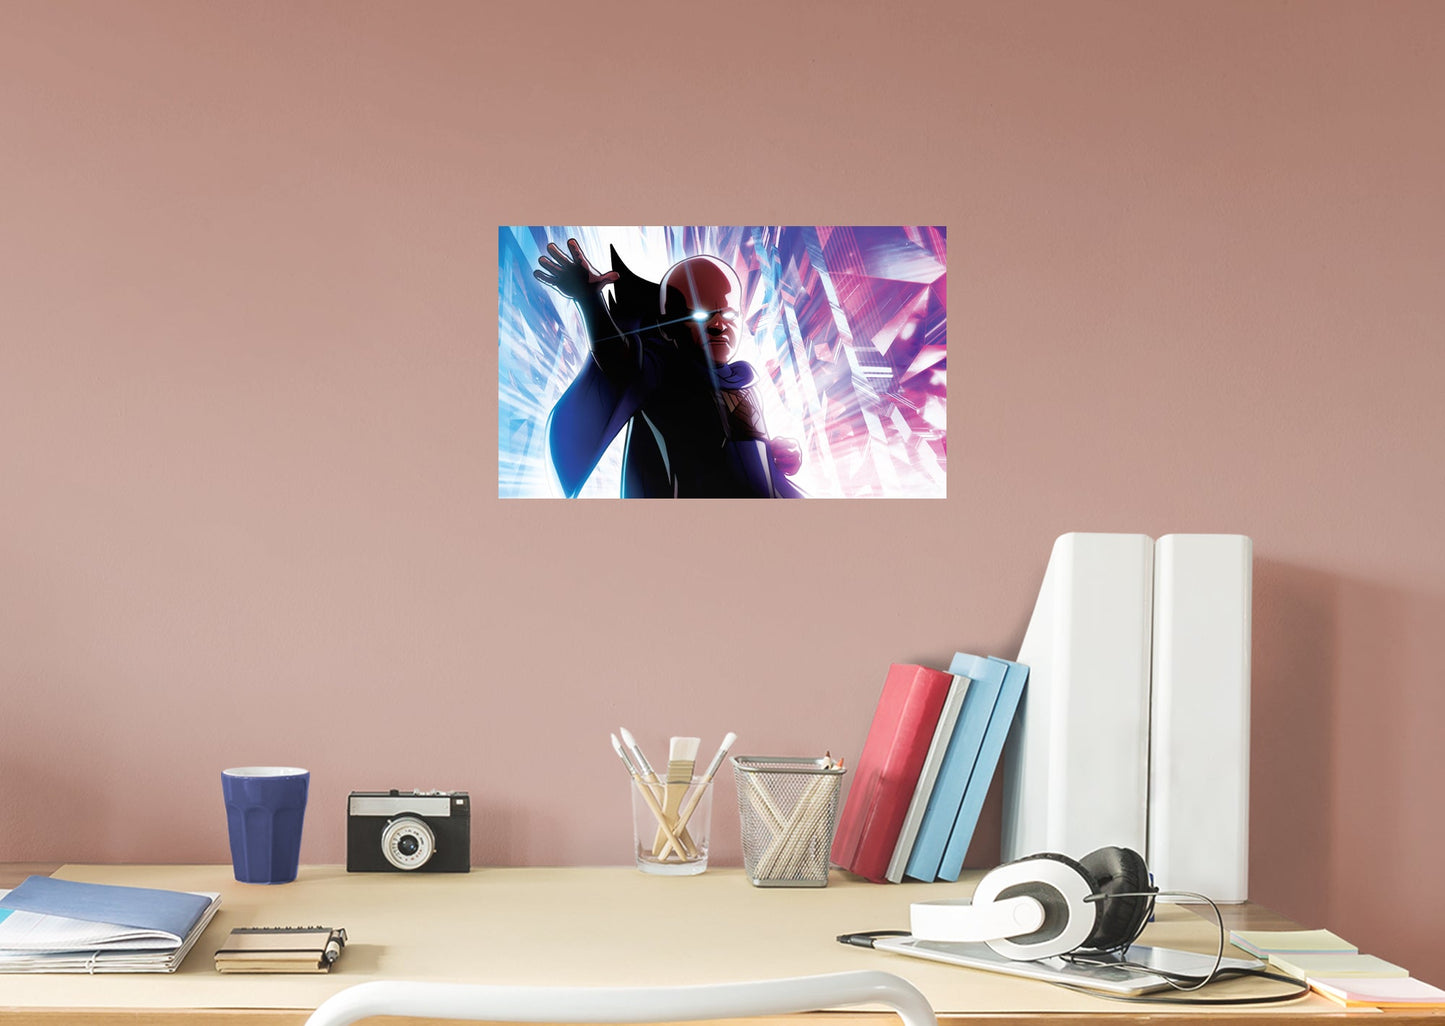 What If...: The Watcher Mural        - Officially Licensed Marvel Removable Wall   Adhesive Decal